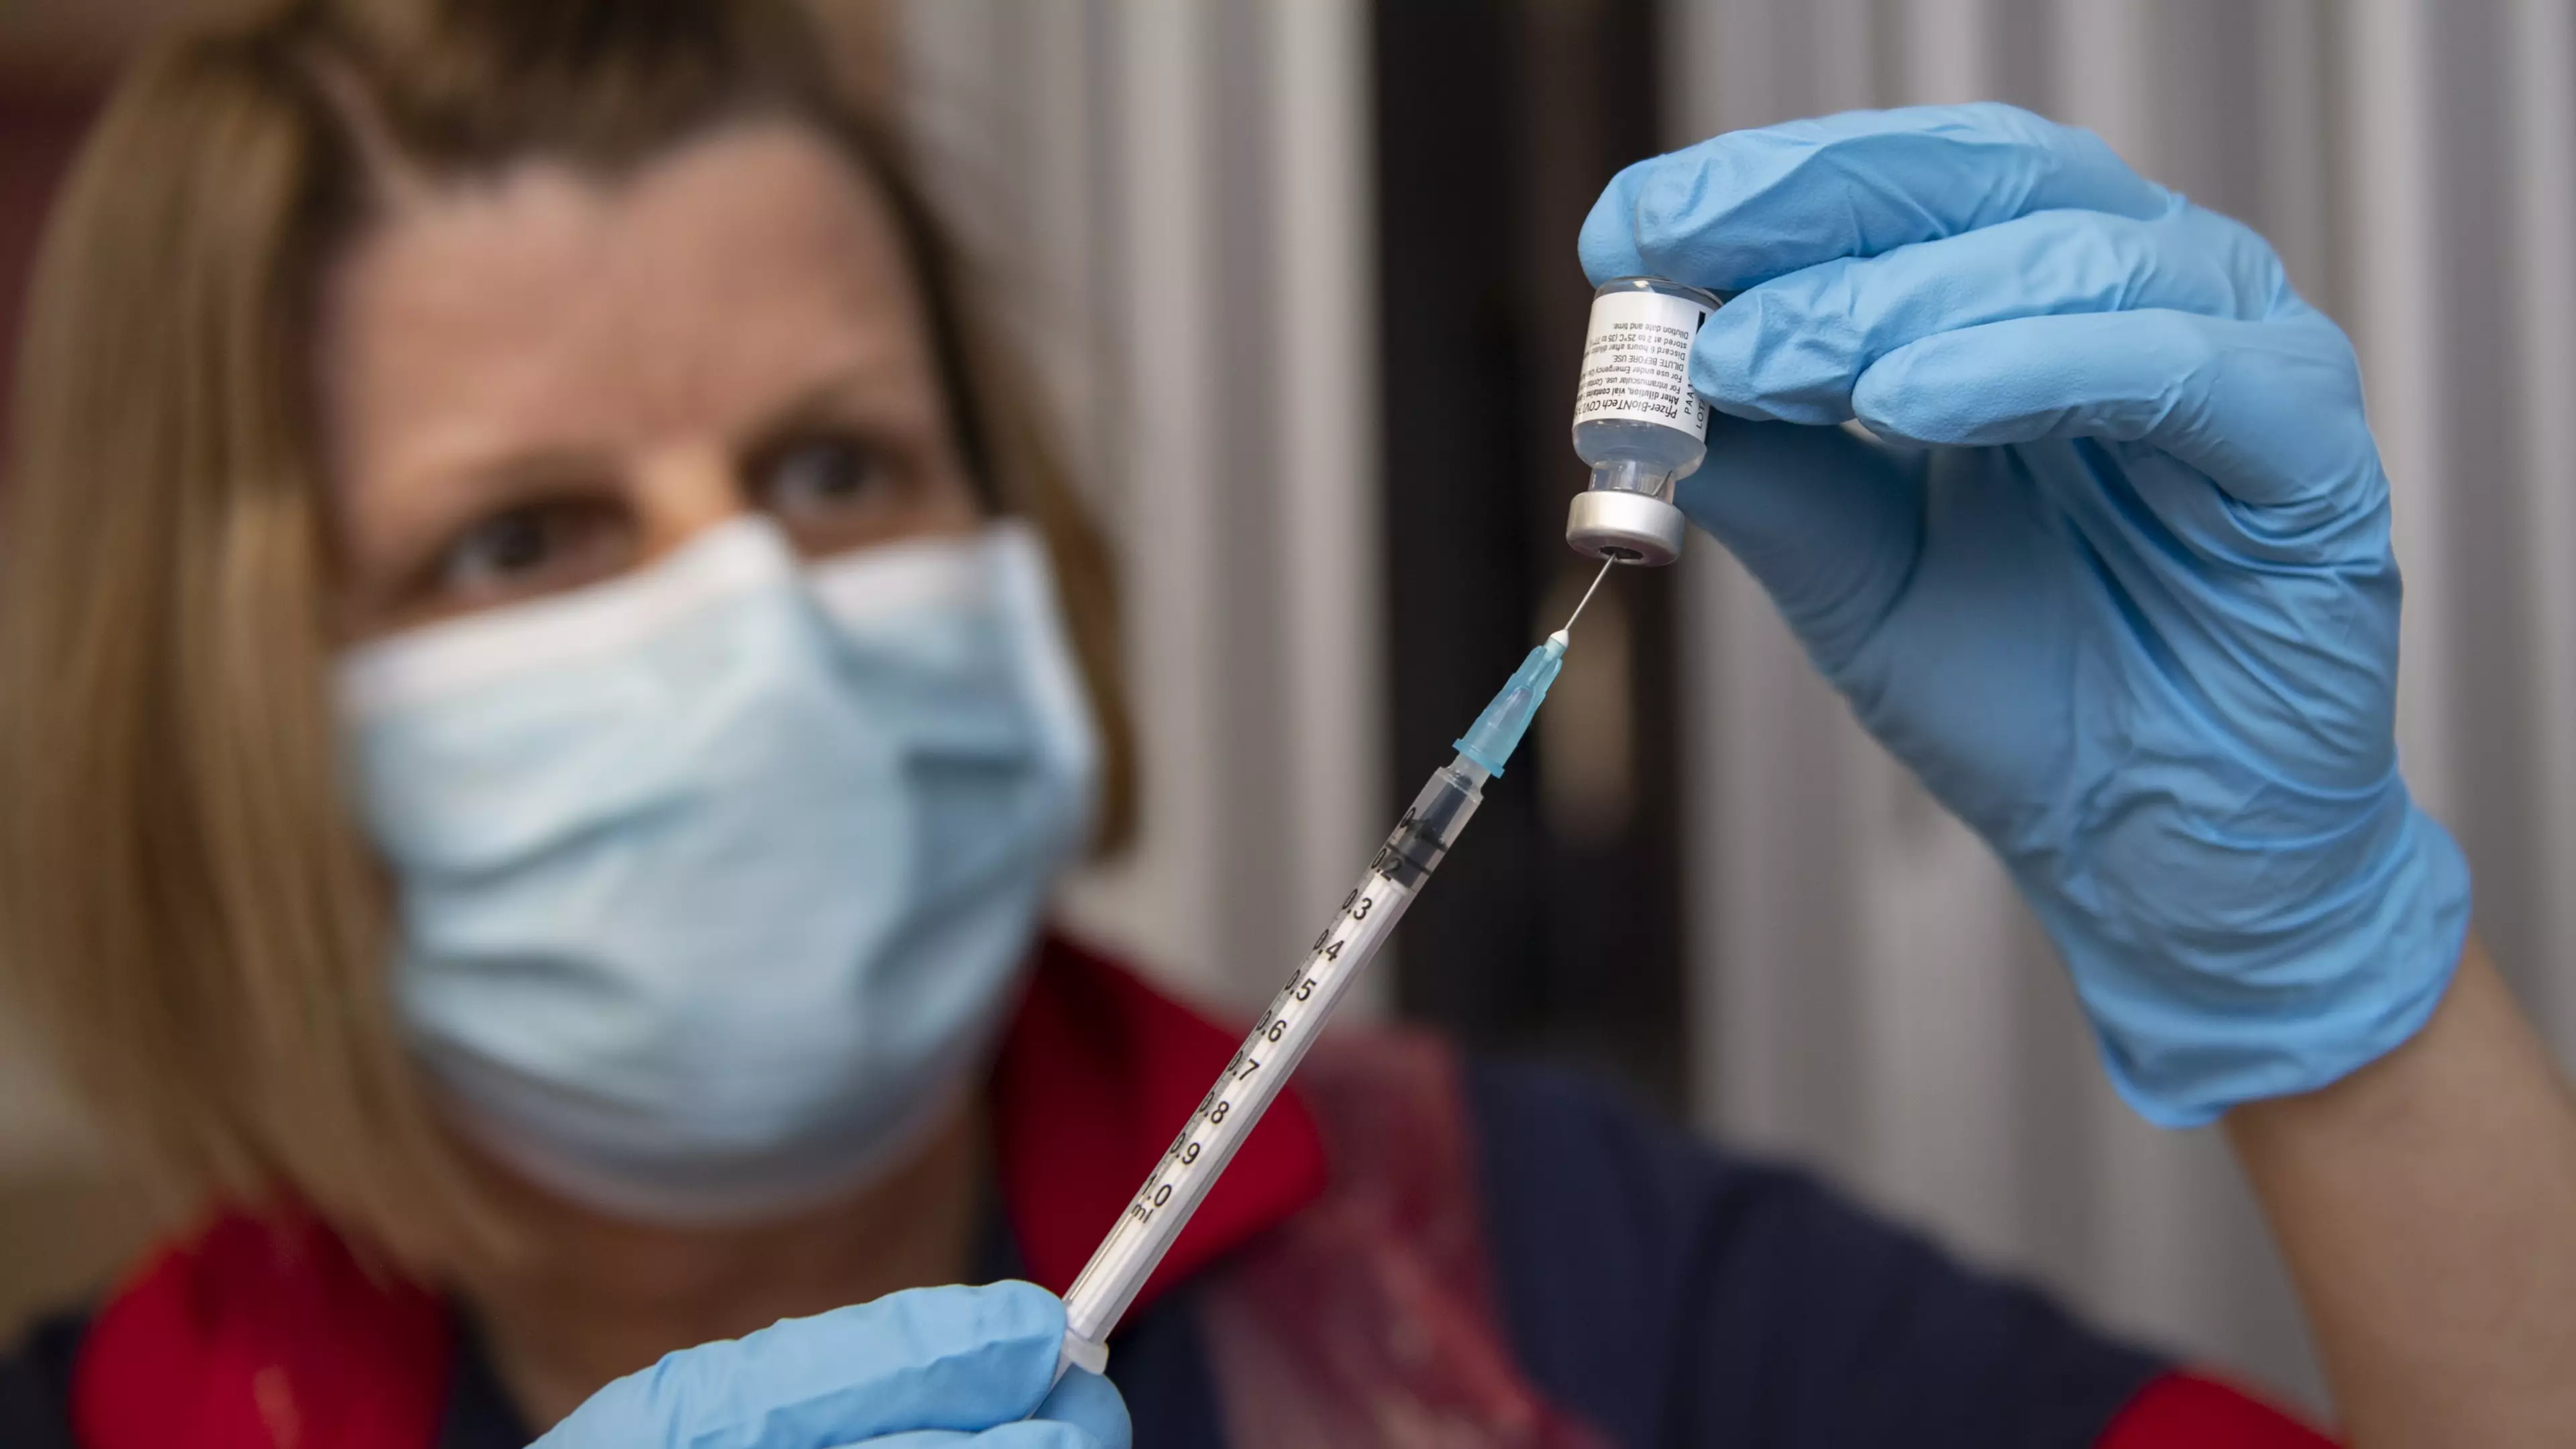 UK Government Considering Vaccine Certificates To Help Reopen Economy